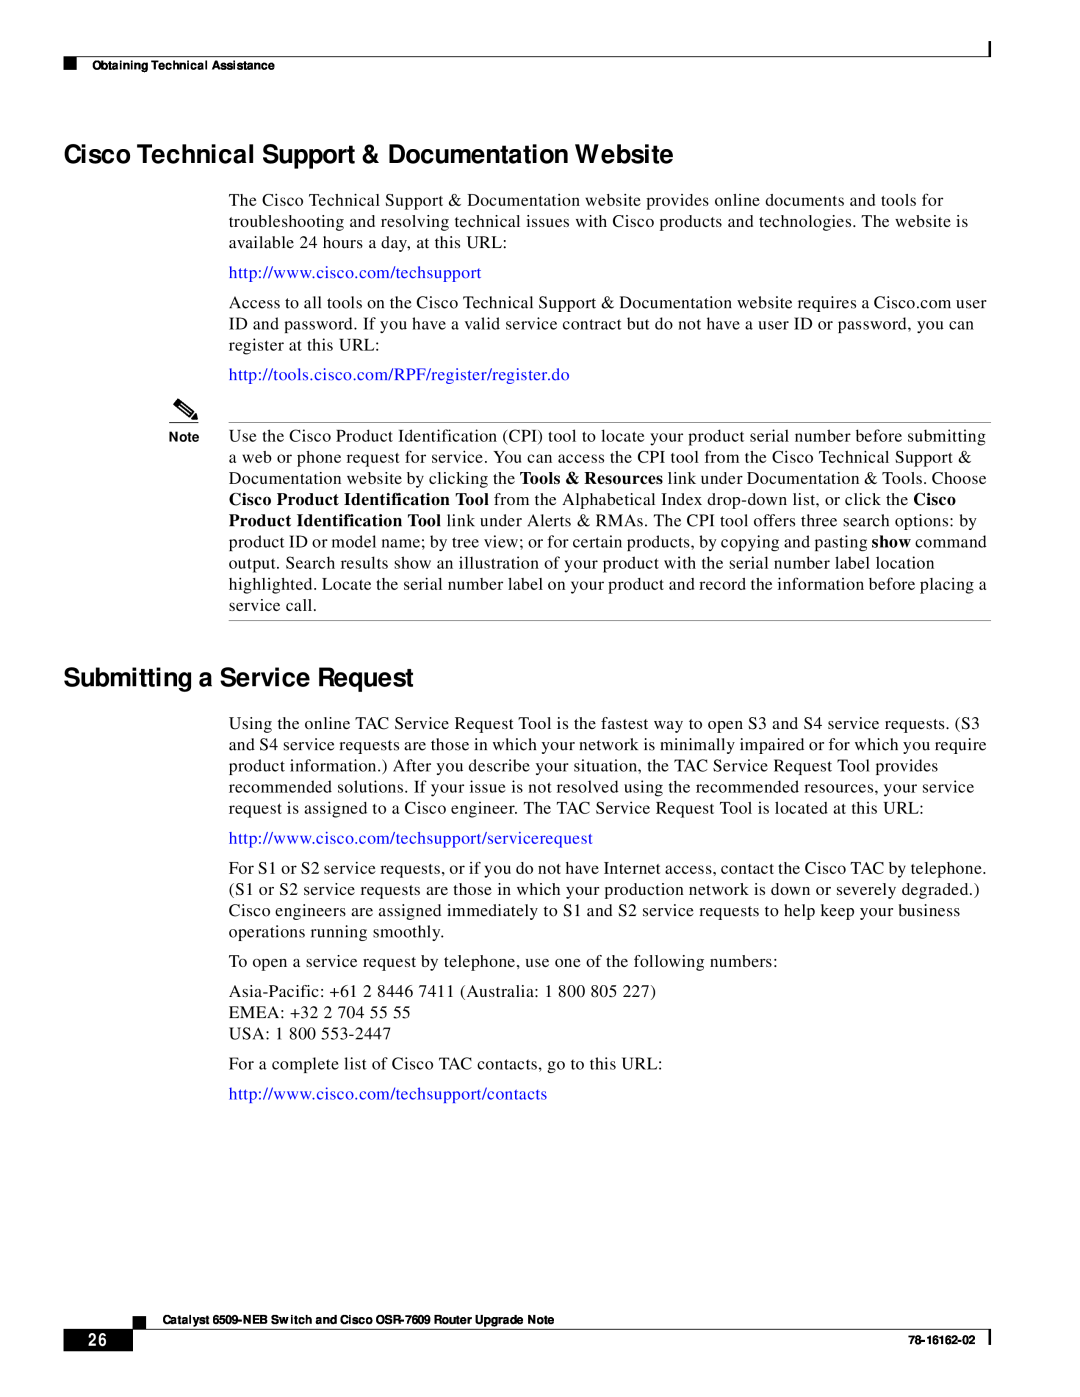 Cisco Systems 6509-NEB, OSR-7609 manual Cisco Technical Support & Documentation Website, Submitting a Service Request 